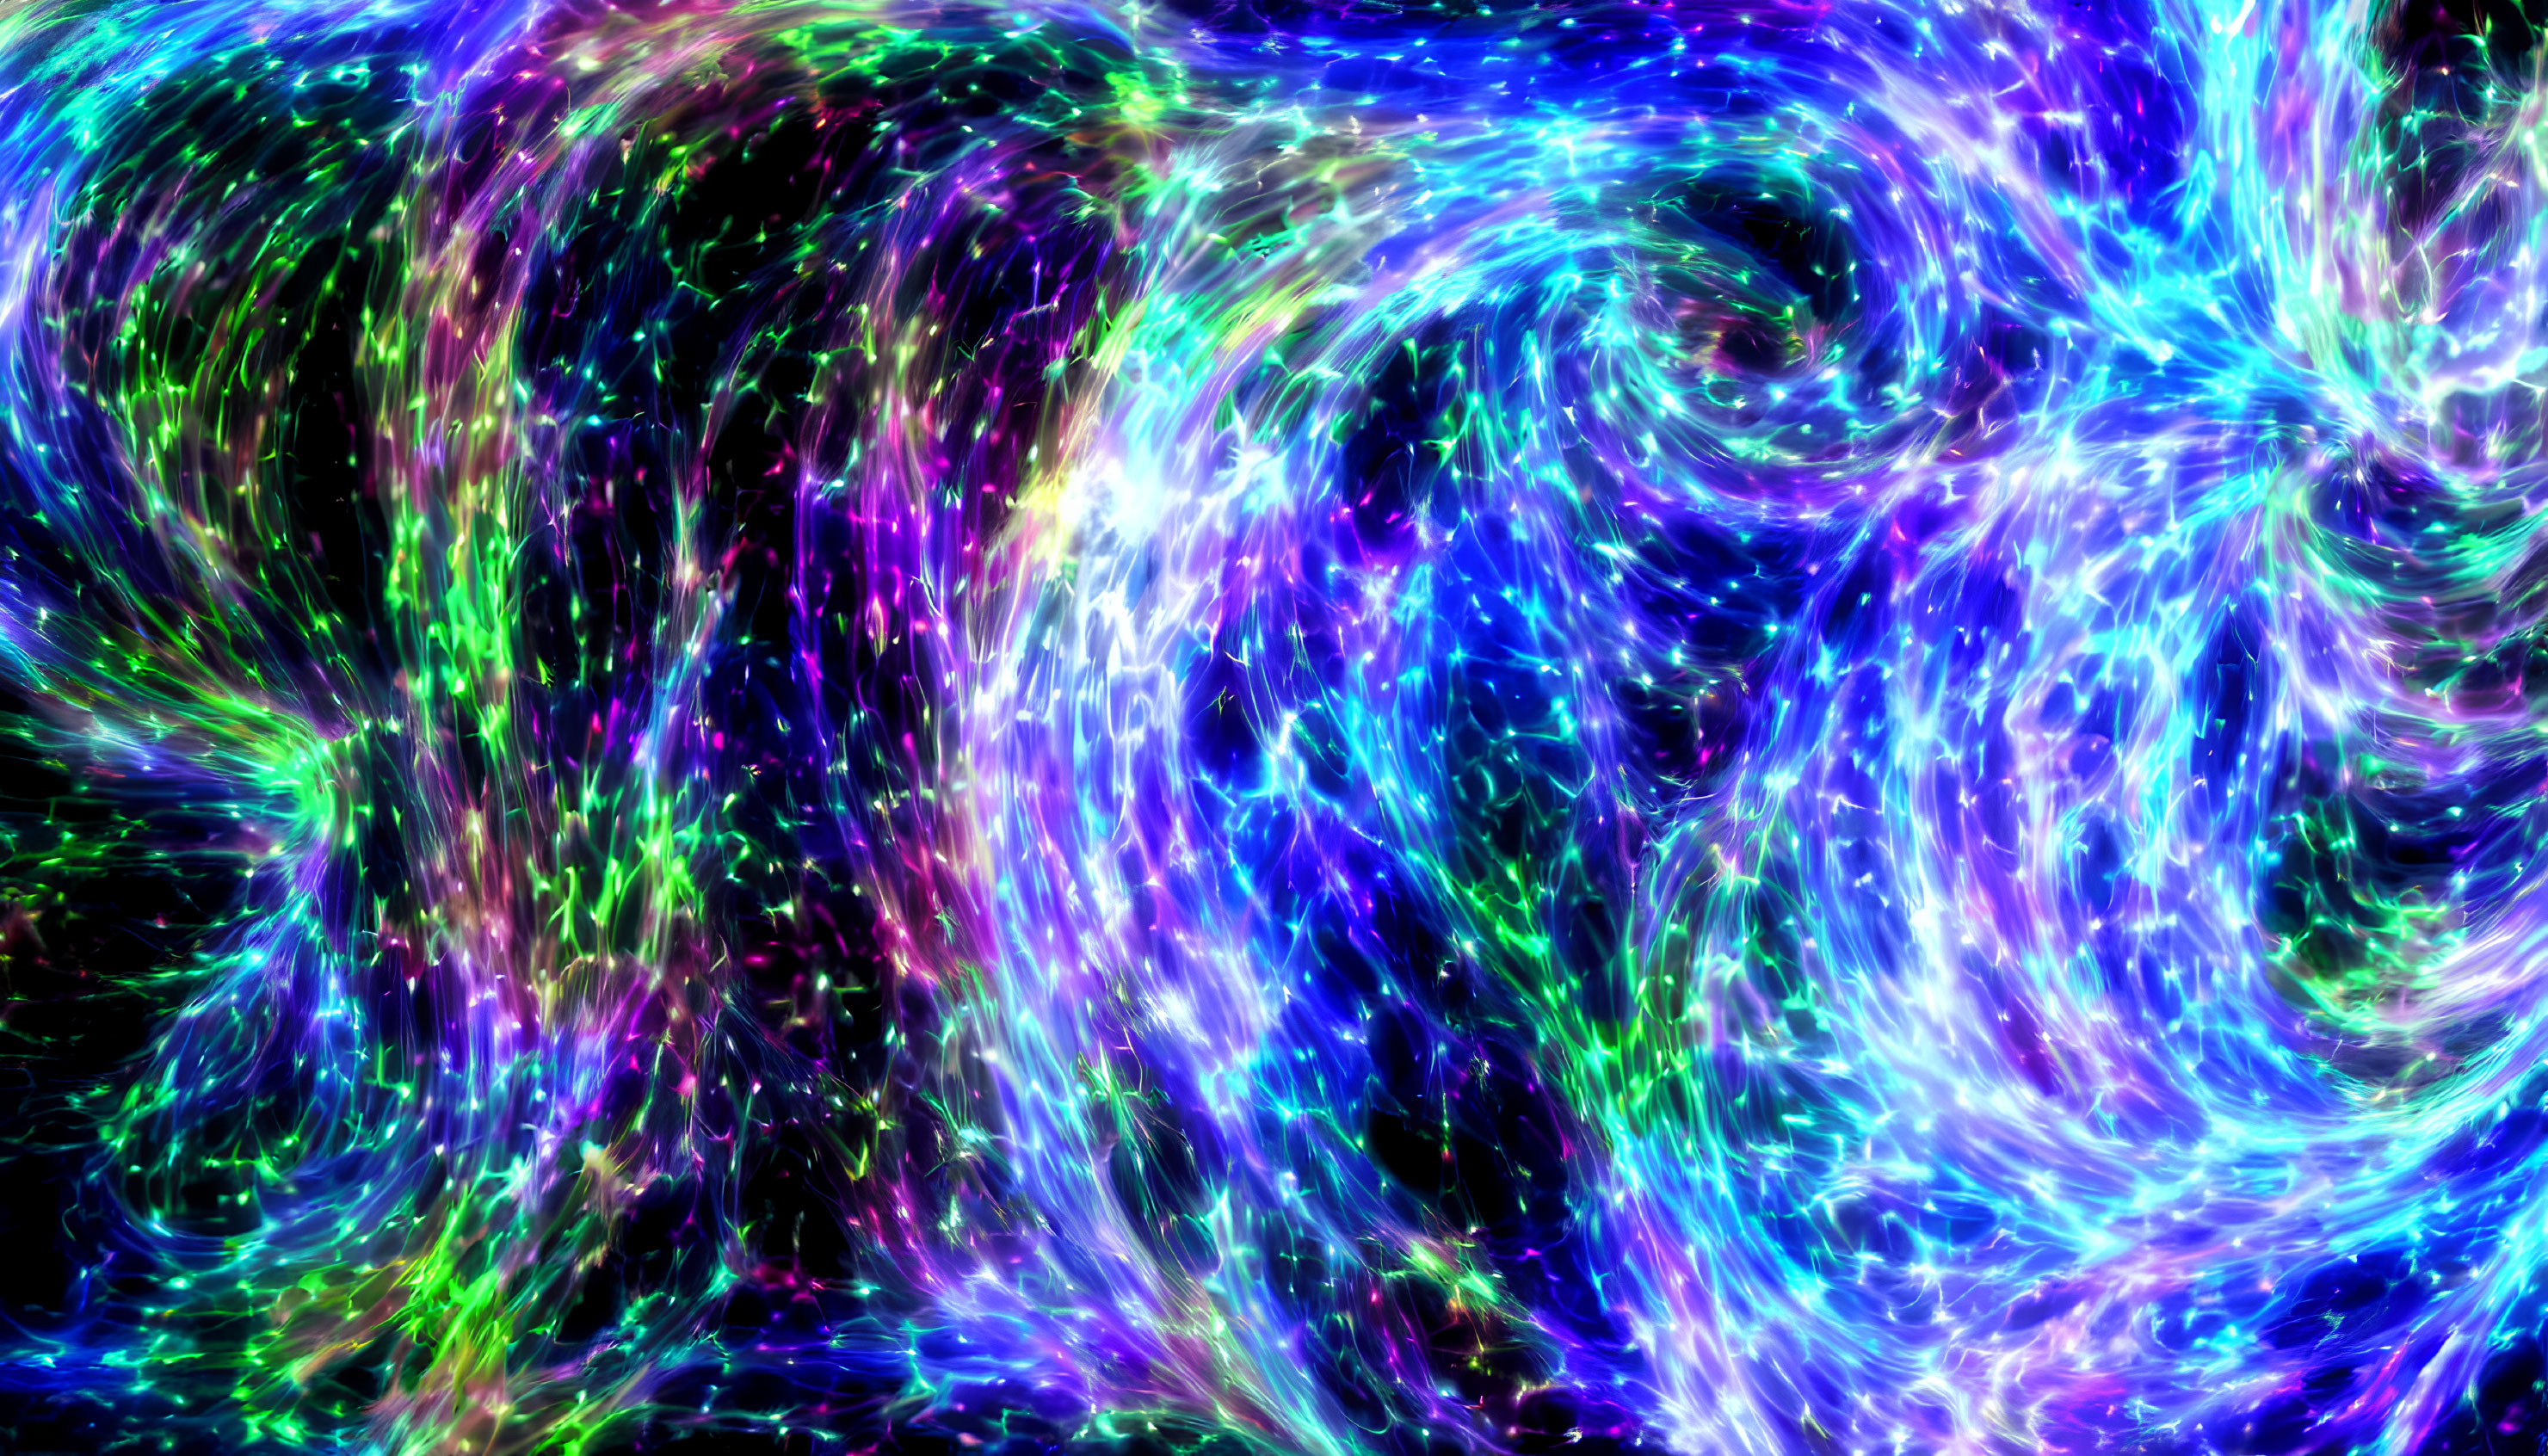 Colorful Abstract Swirls with Neon Glow on Dark Background